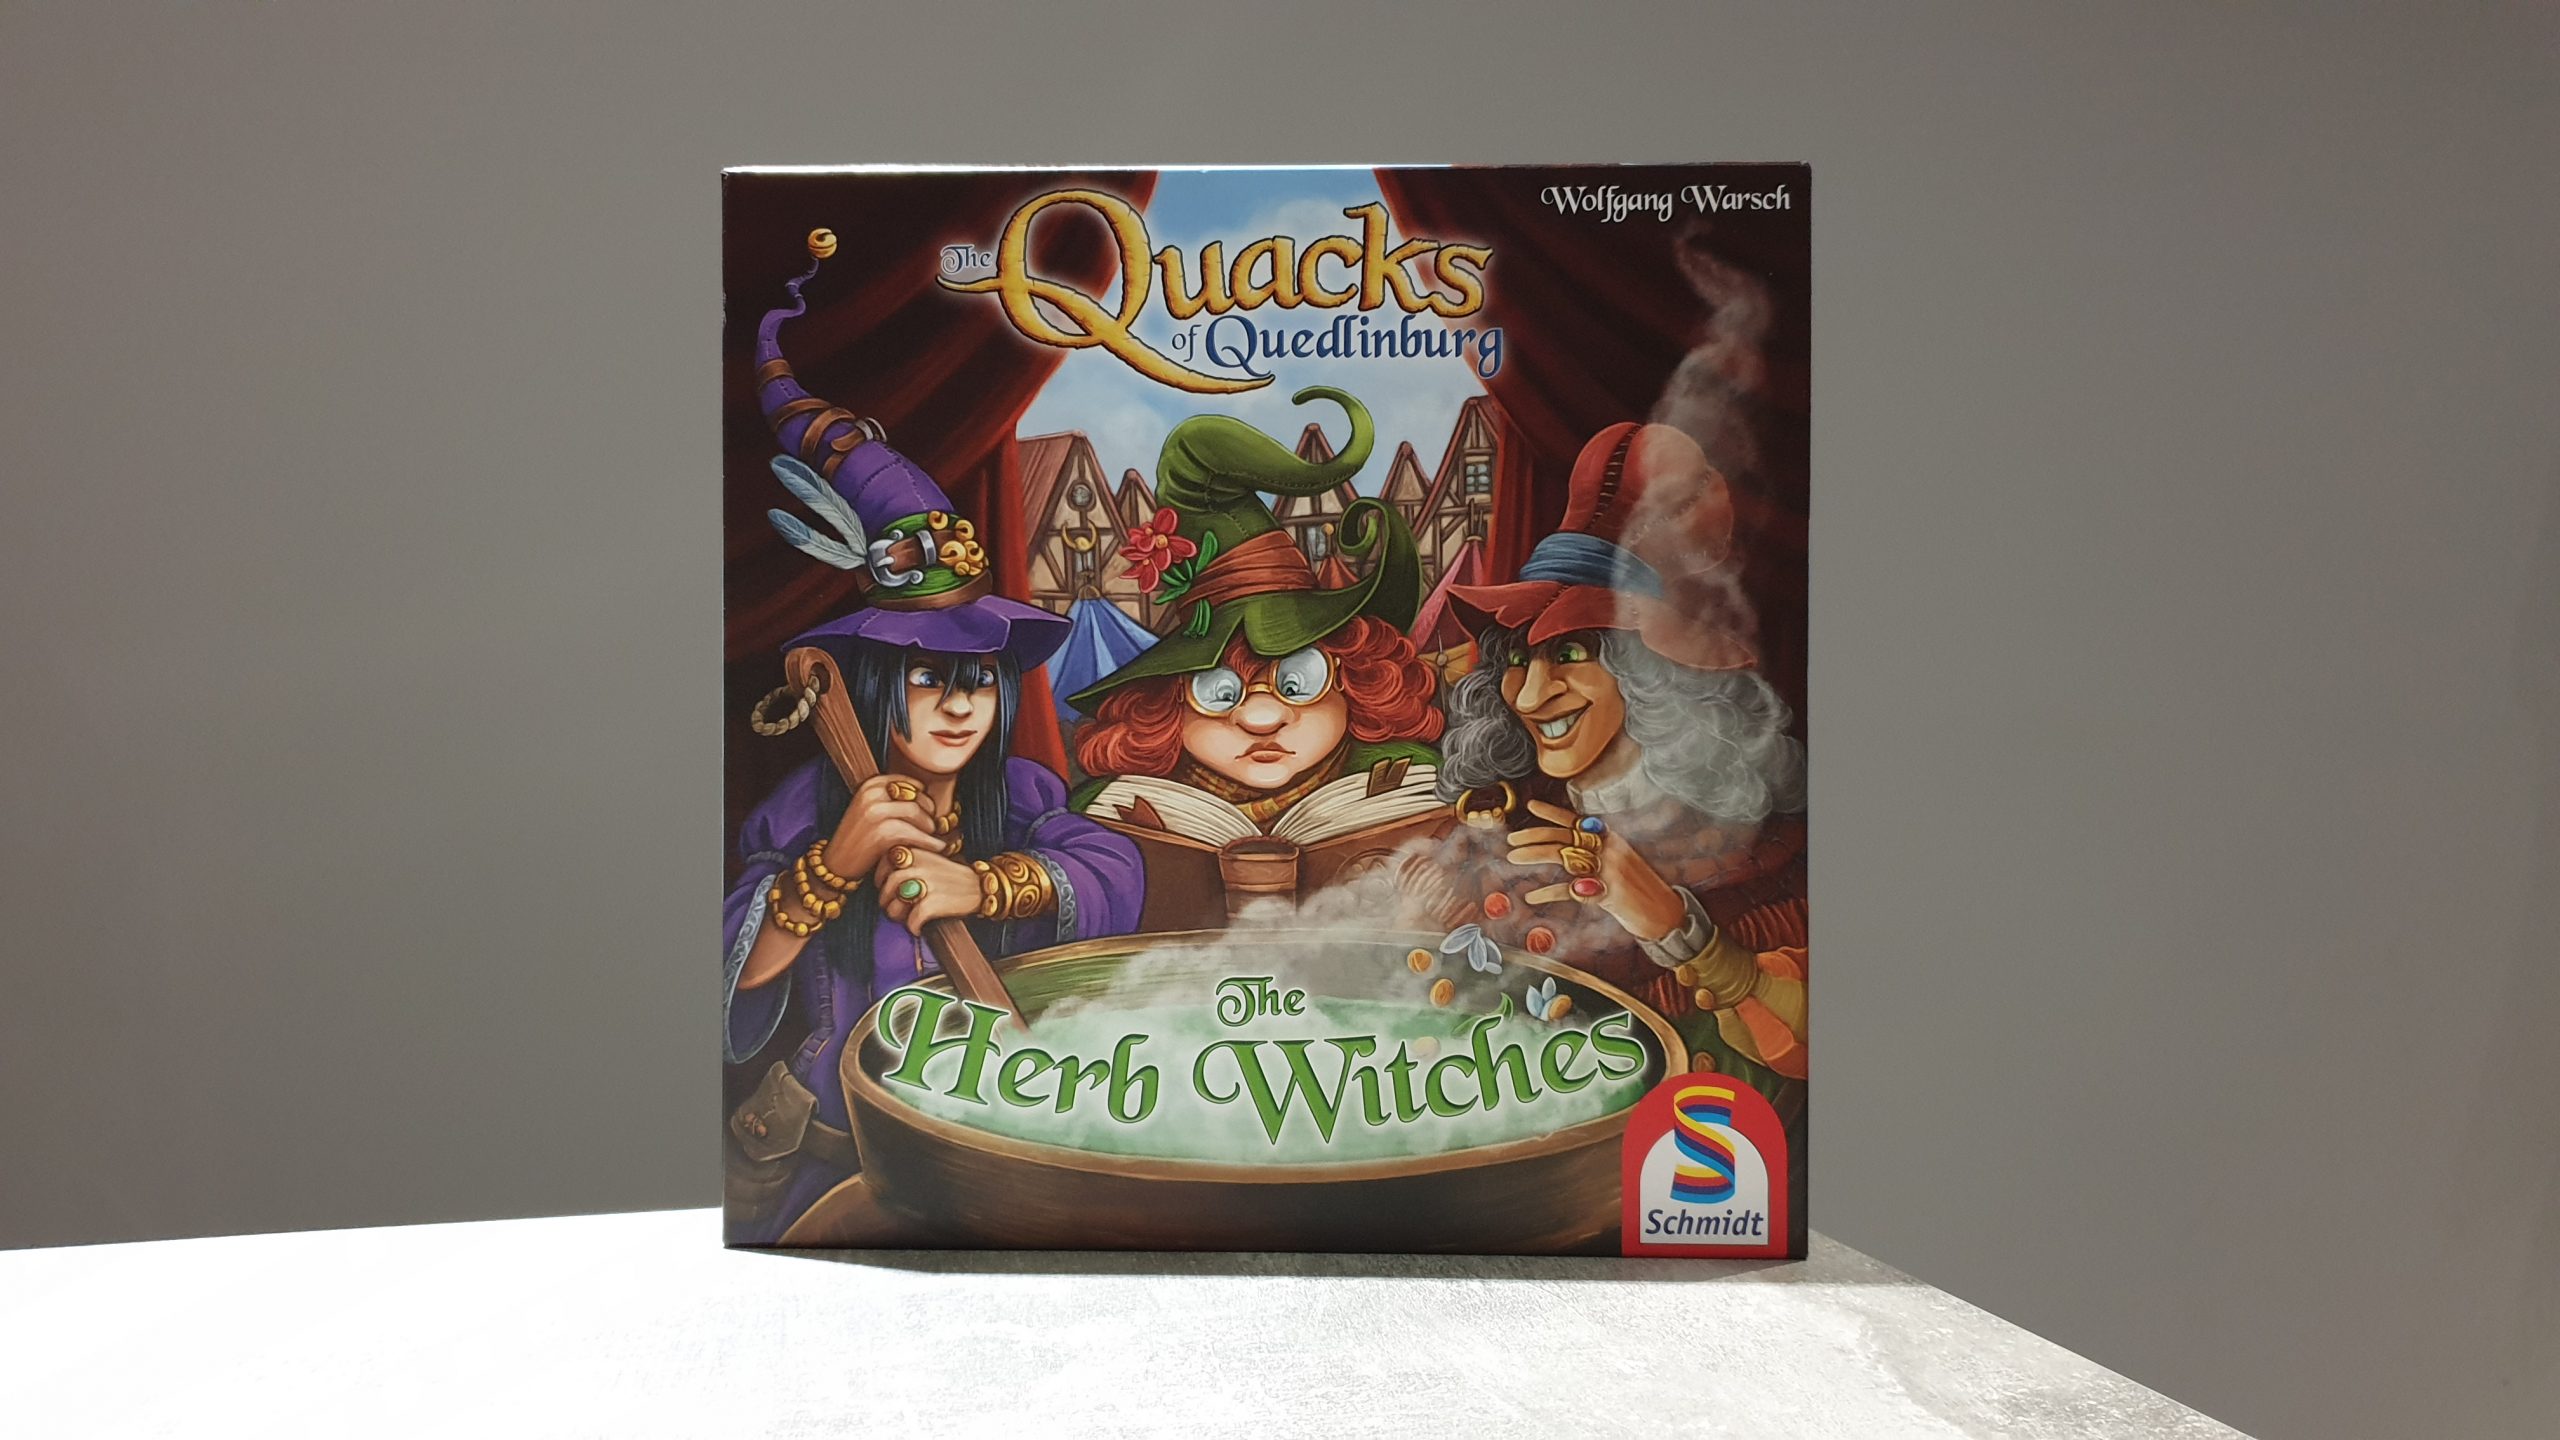 The Quacks of Quedlinburg The Herb Witches Review